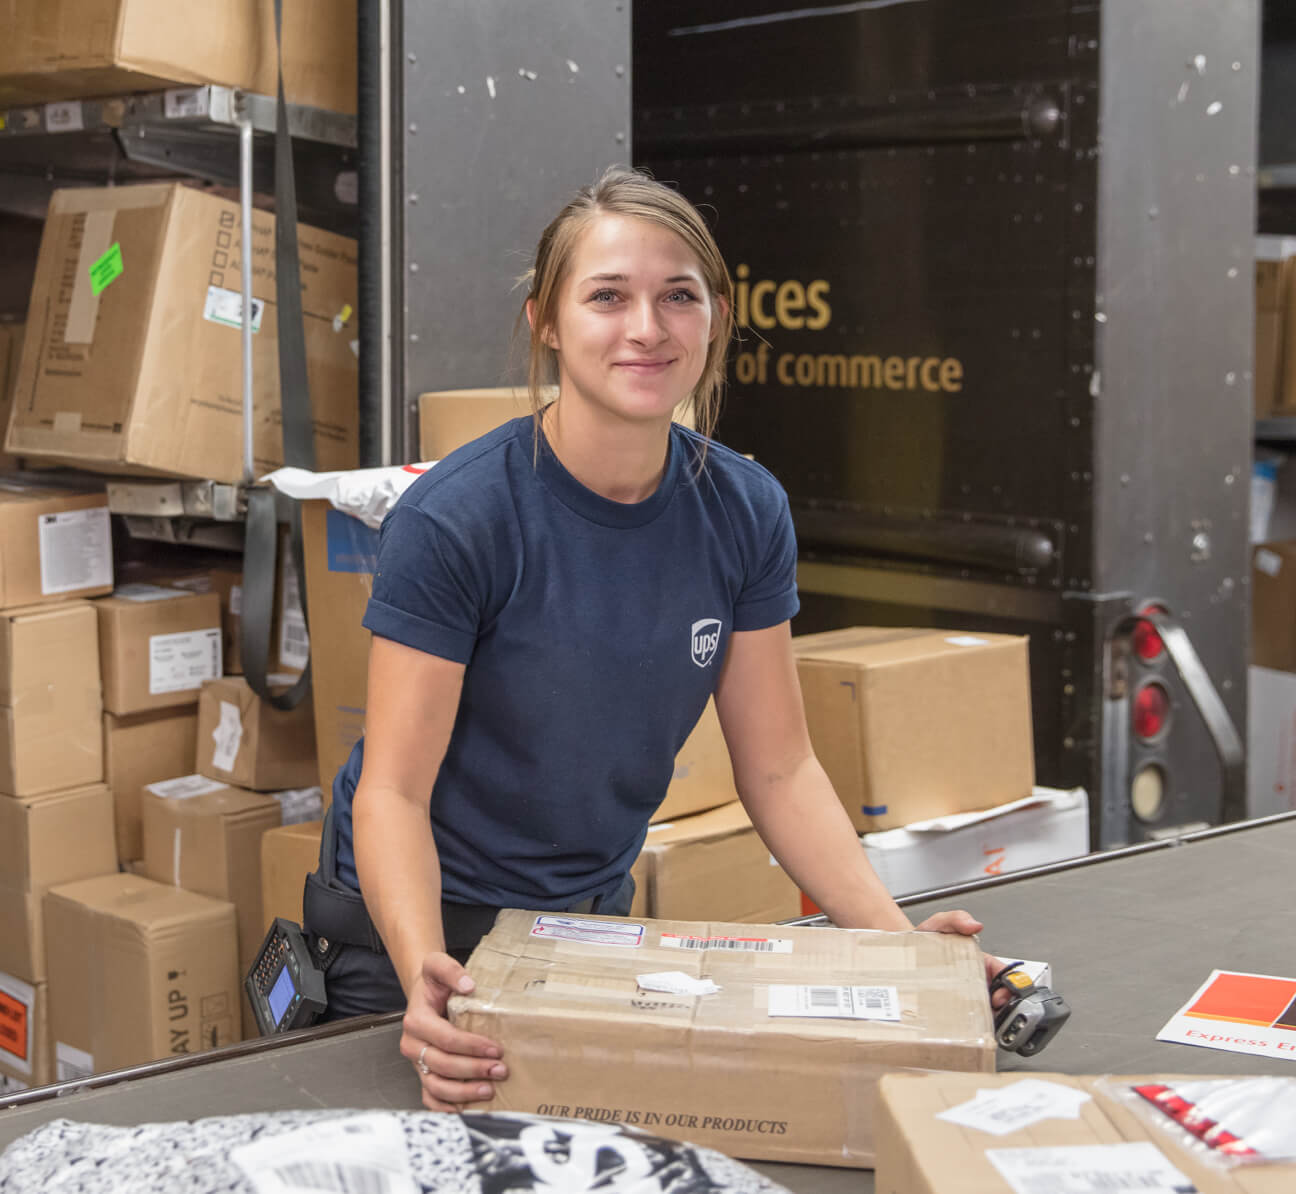 Female employee smiling while sorting packages